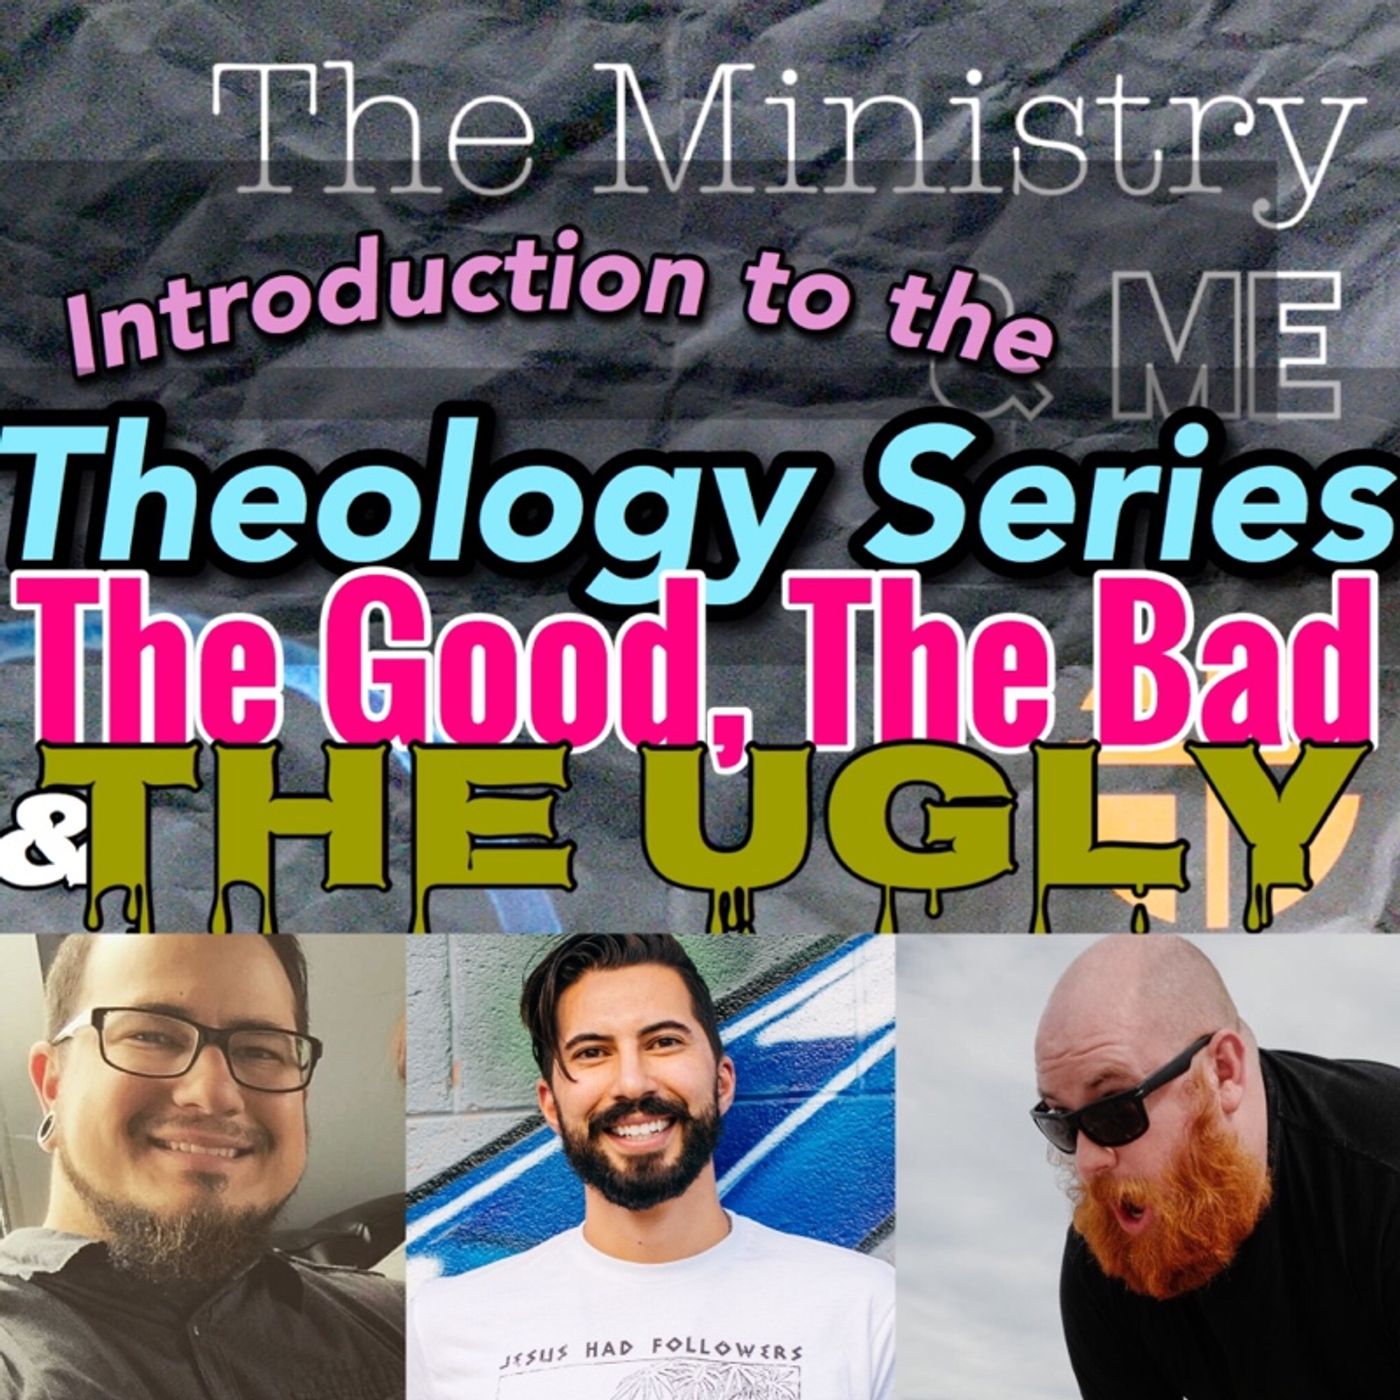 Theology Series - The Good The Bad and The Ugly